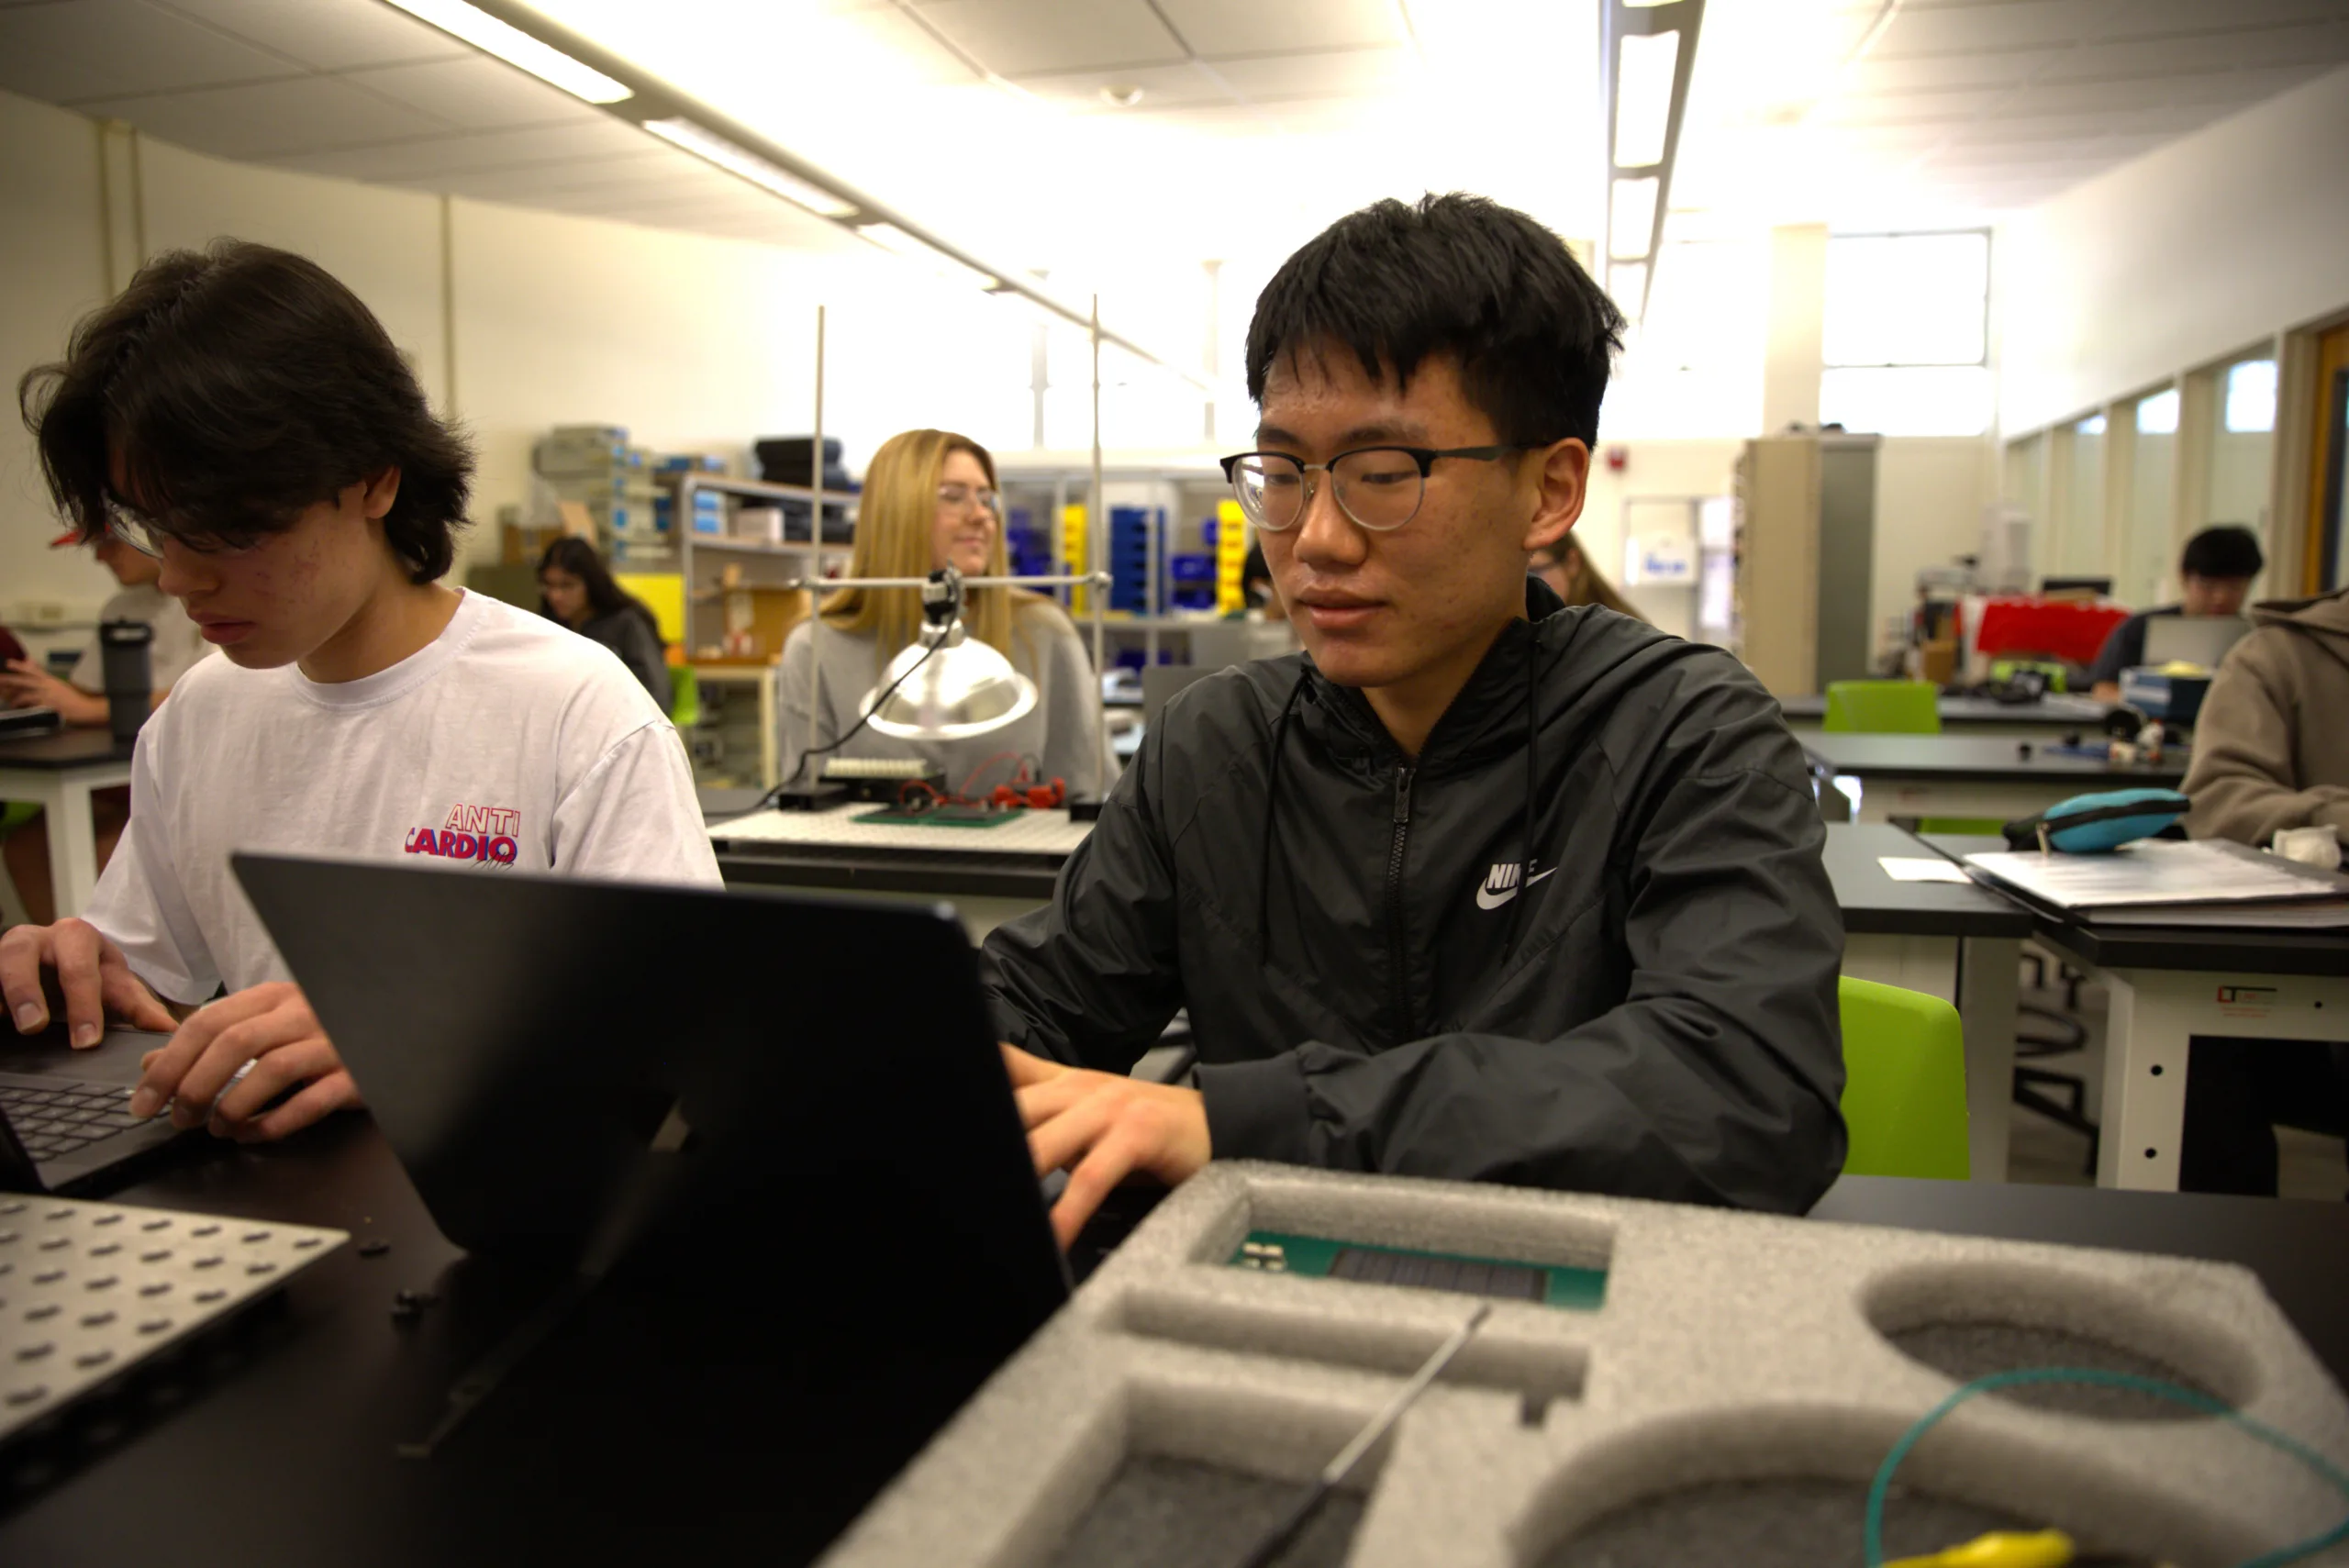 Students work on laptops in a lab